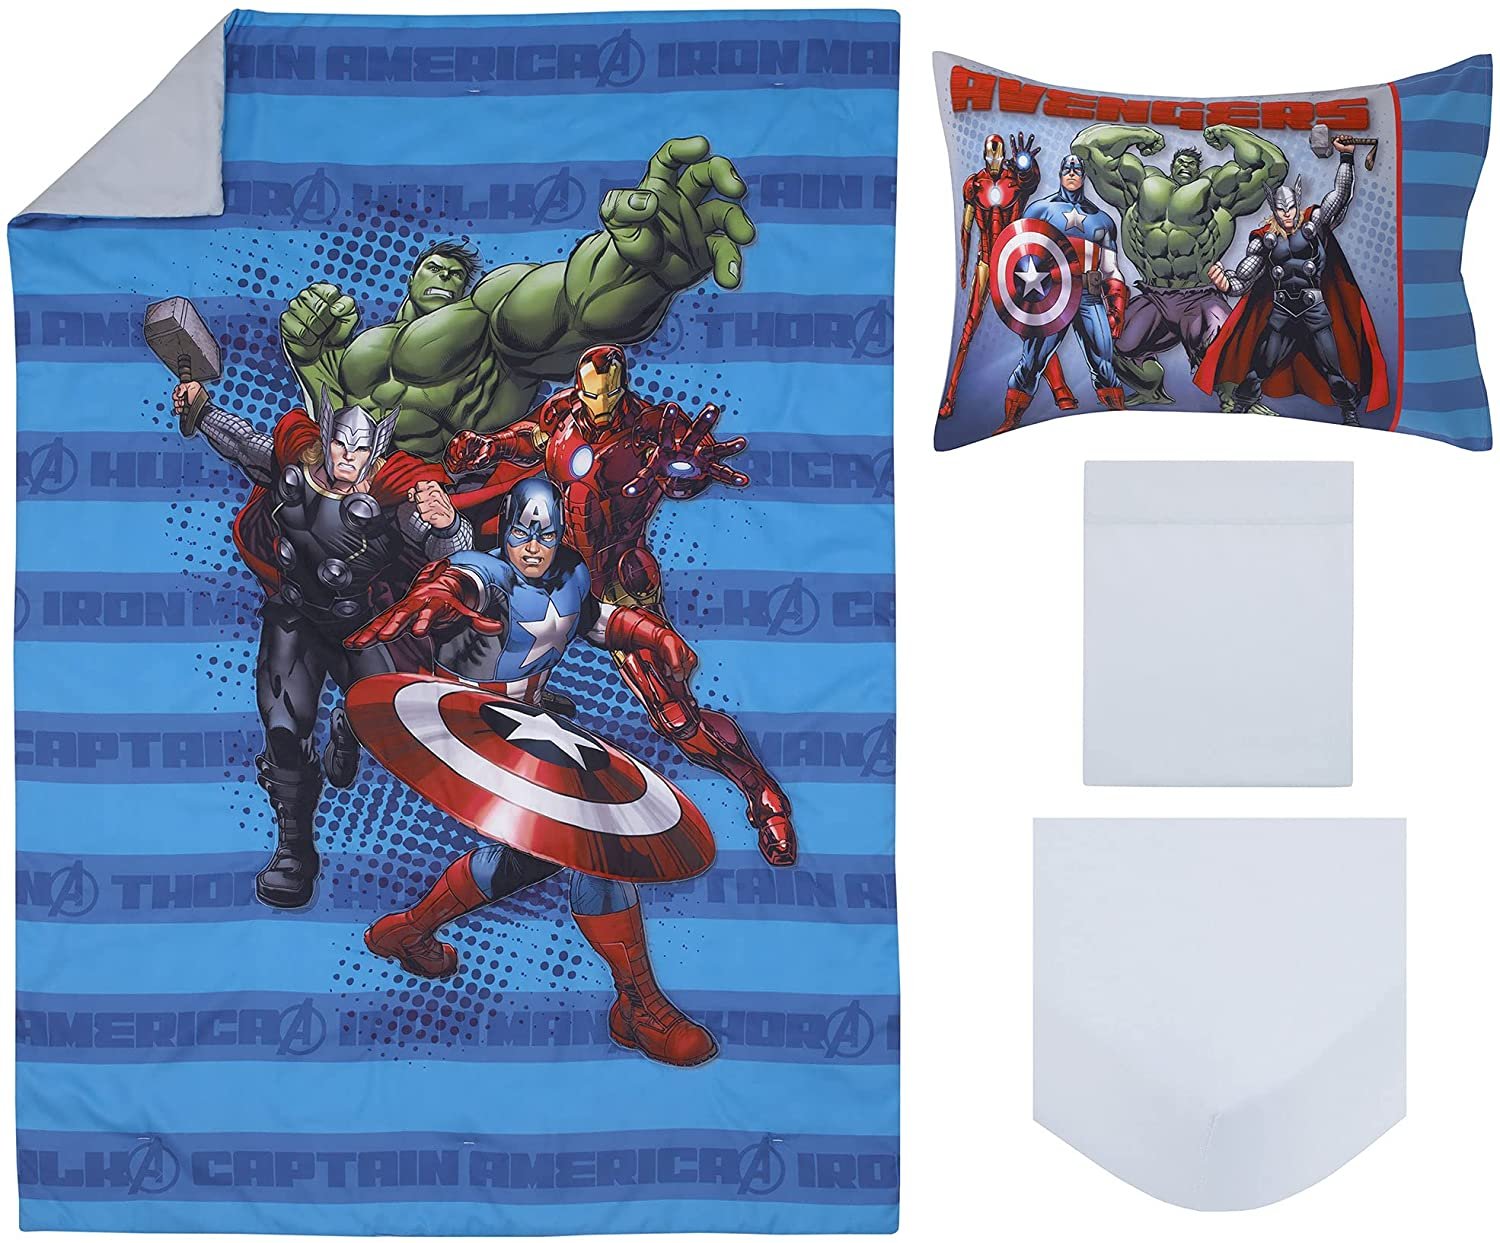 Crown Crafts Marvel Avengers 4 Piece Bedding Sets, Toddler Bed with Bedspread, Fitted Bottom Sheet, Flat Top Sheet, Pillowcase - image 2 of 7